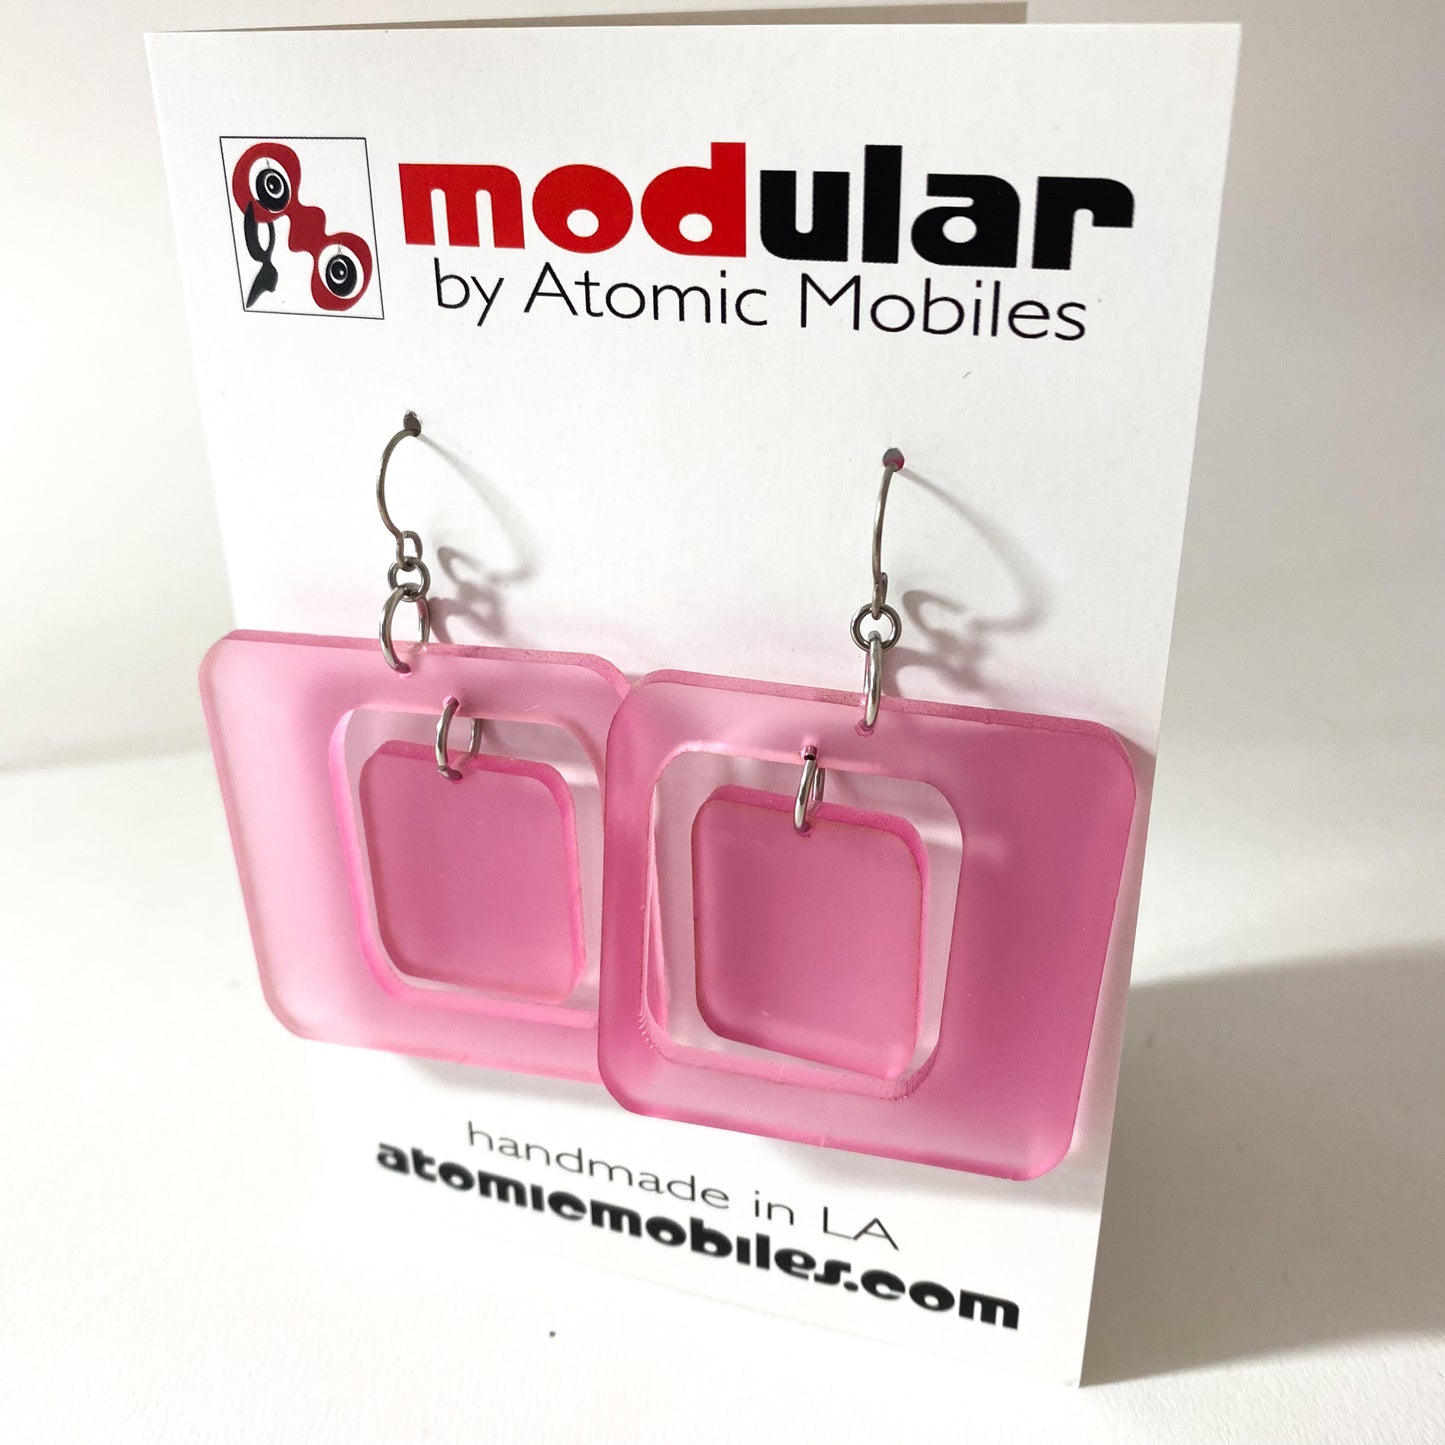 Frosted Pink Coolsville retro mid century modern statement fashion earrings by AtomicMobiles.com